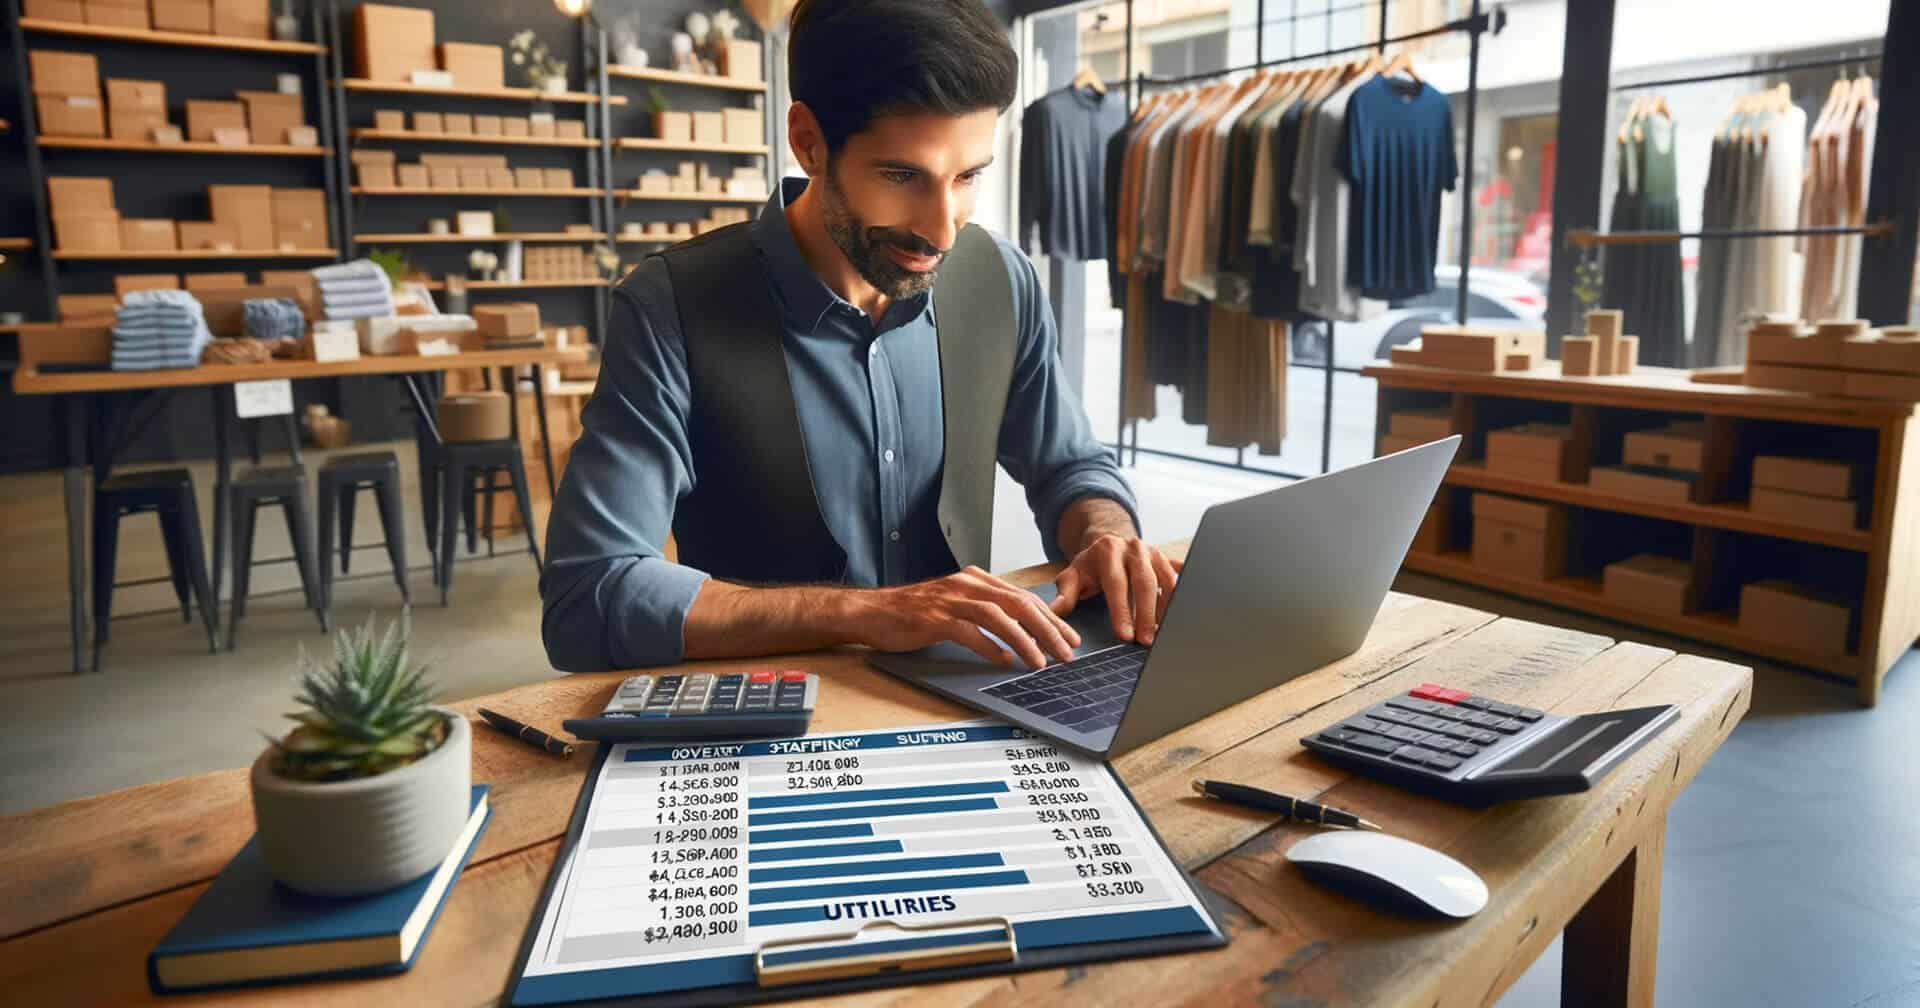 A man efficiently working on a laptop, managing business tasks and keeping track of costs in a store.